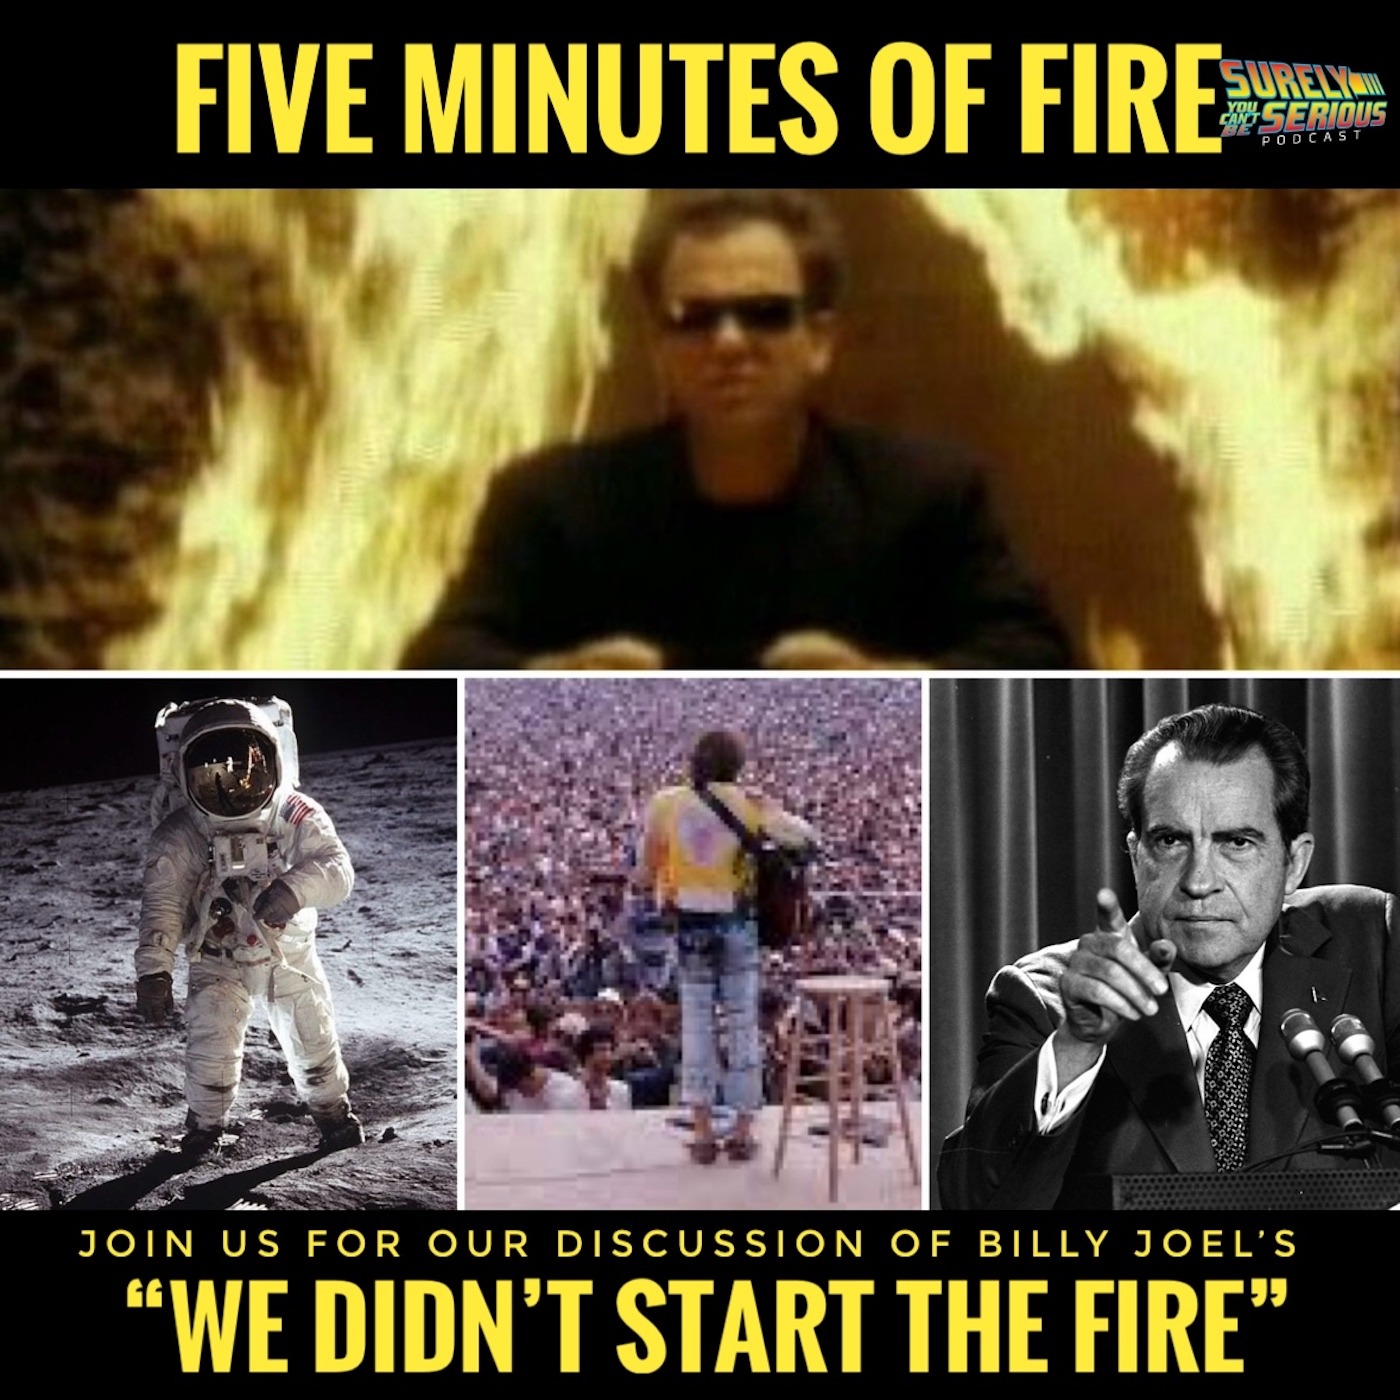 ”Five Minutes of Fire”: Moonshot, Woodstock, Watergate